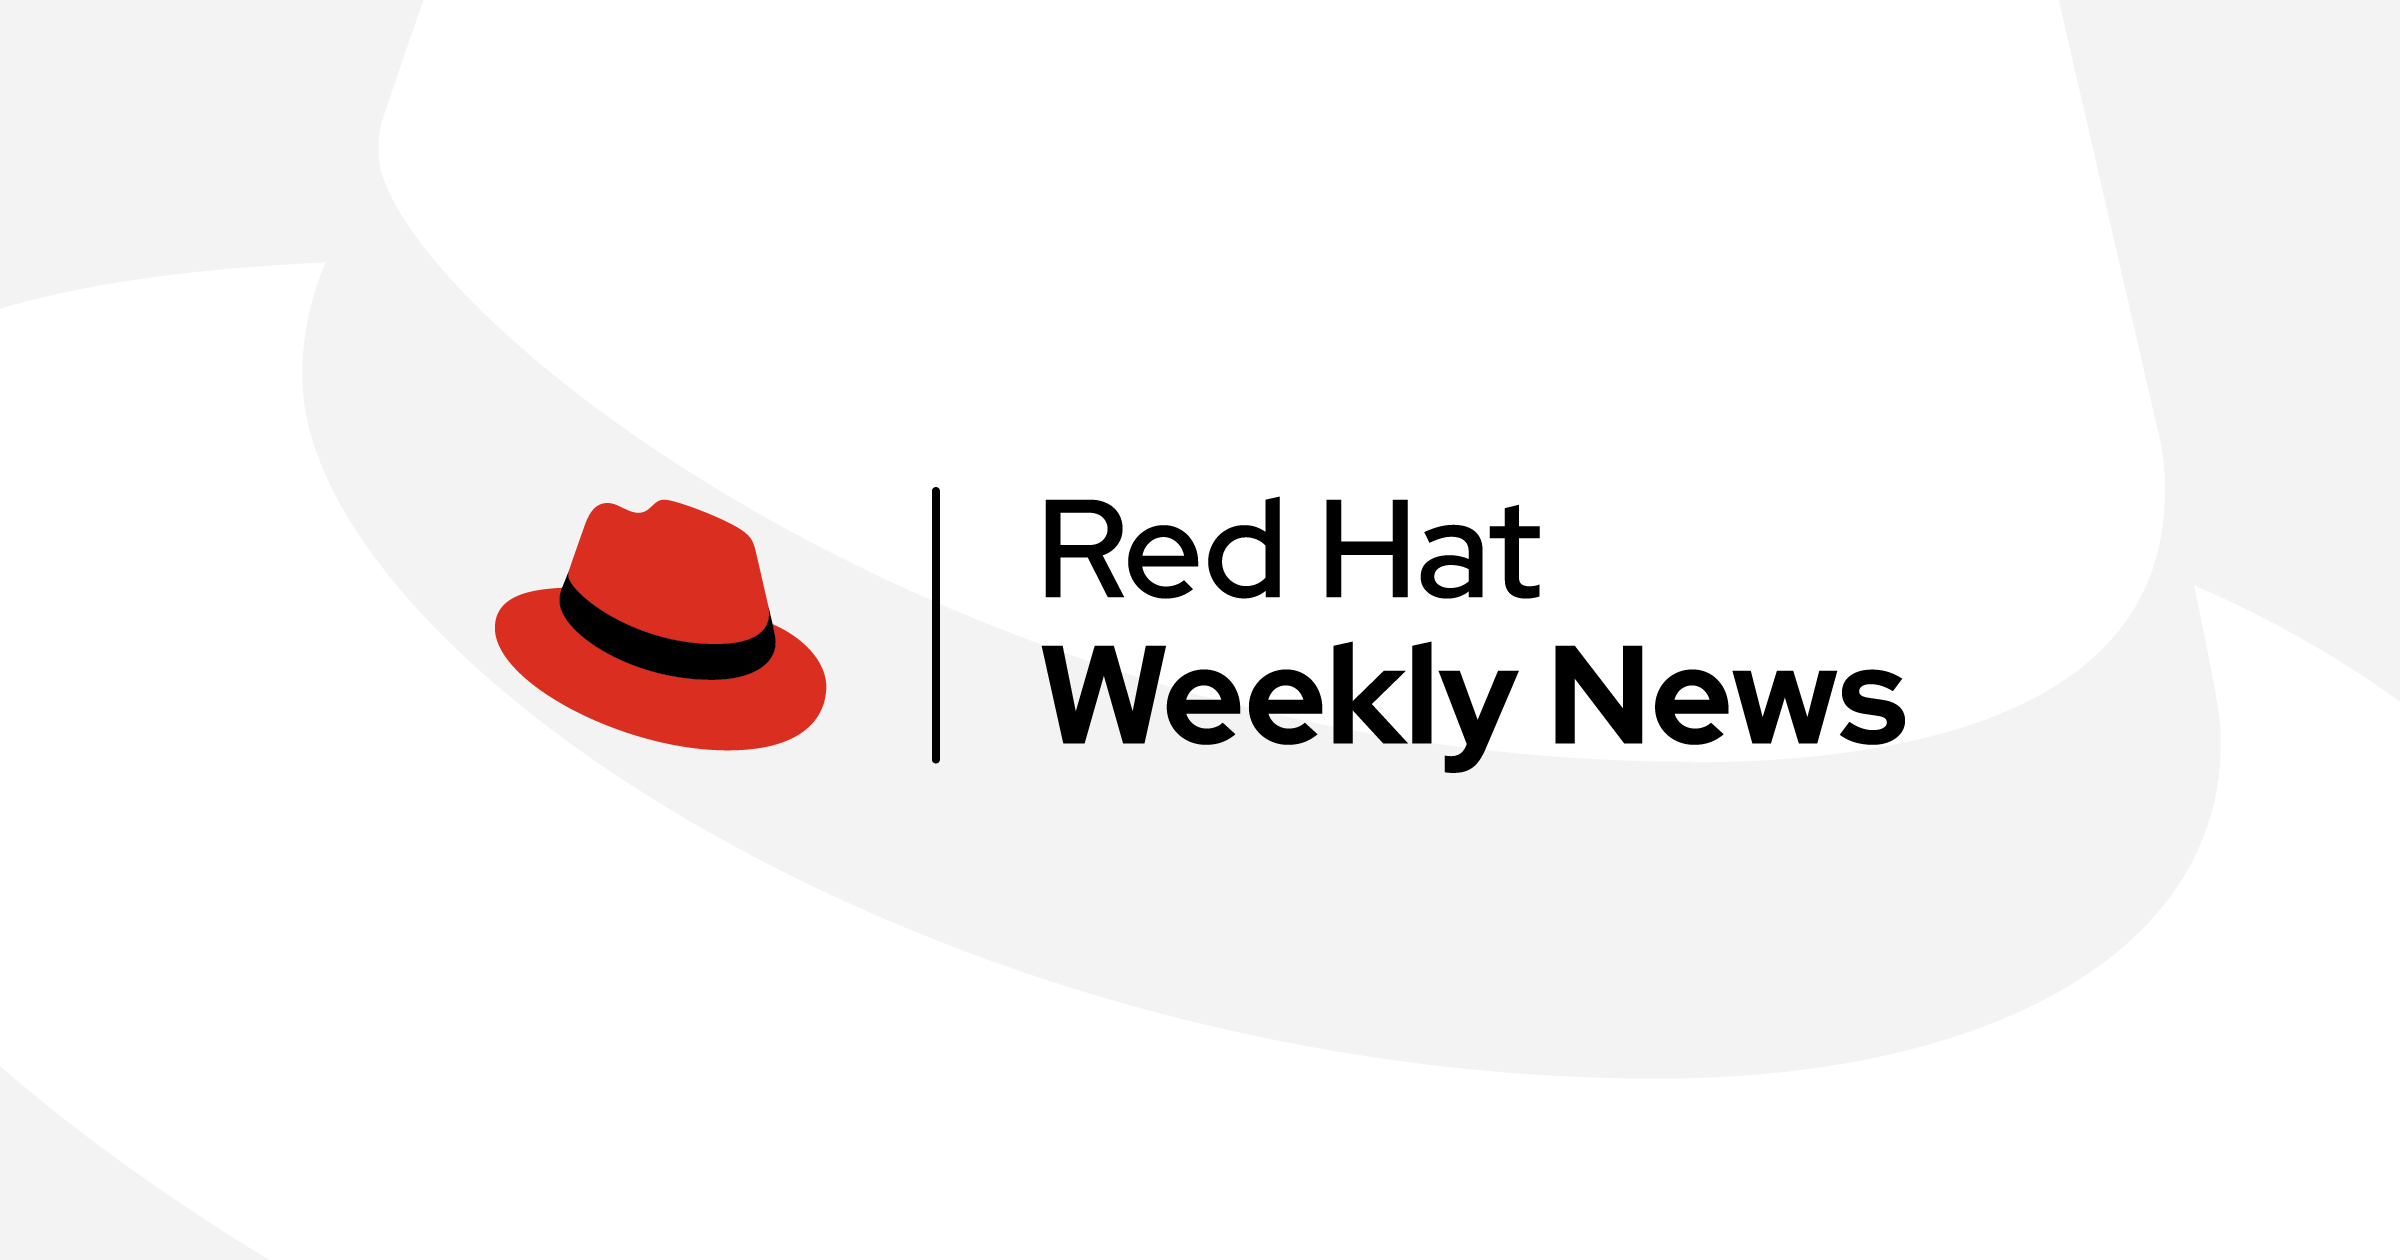 Red Hat Weekly News